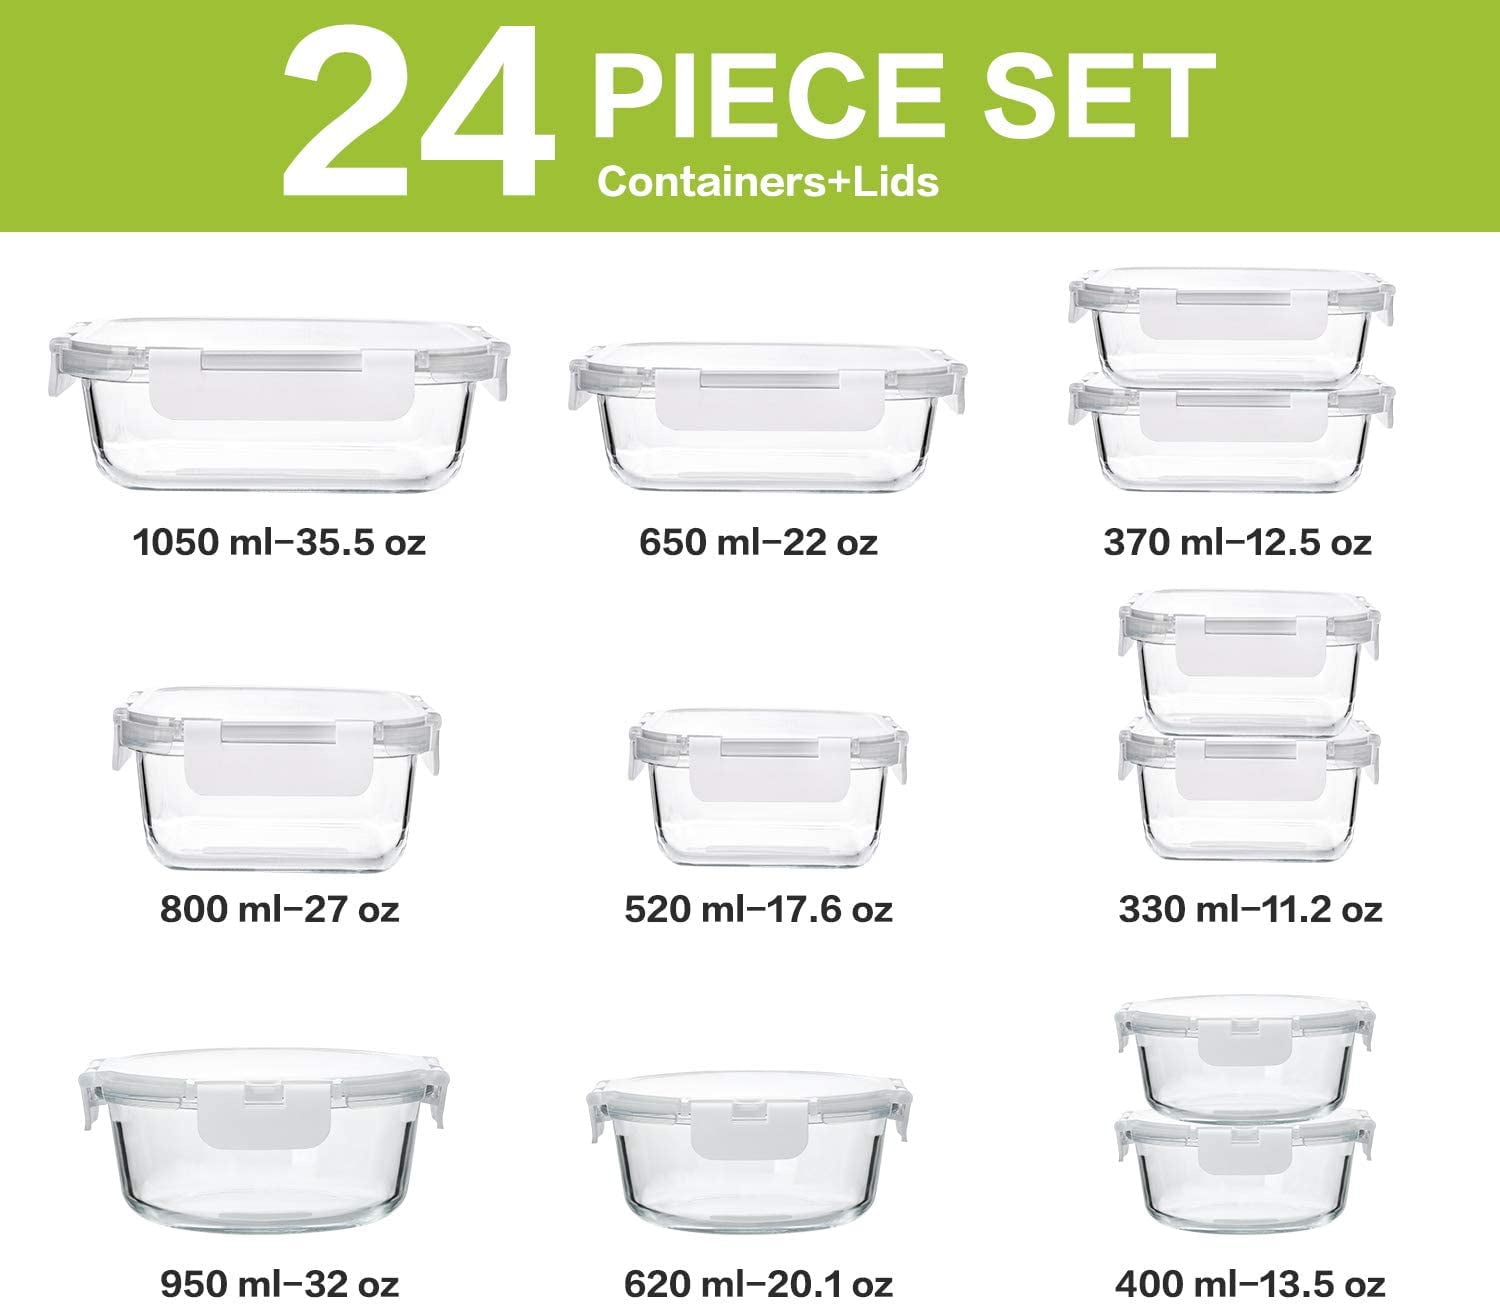 KOMUEE 12 Packs Glass Meal Prep Containers Set, Glass Food Storage  Containers with Locking Lids, Airtight Glass Lunch Containers, BPA Free,  Microwave